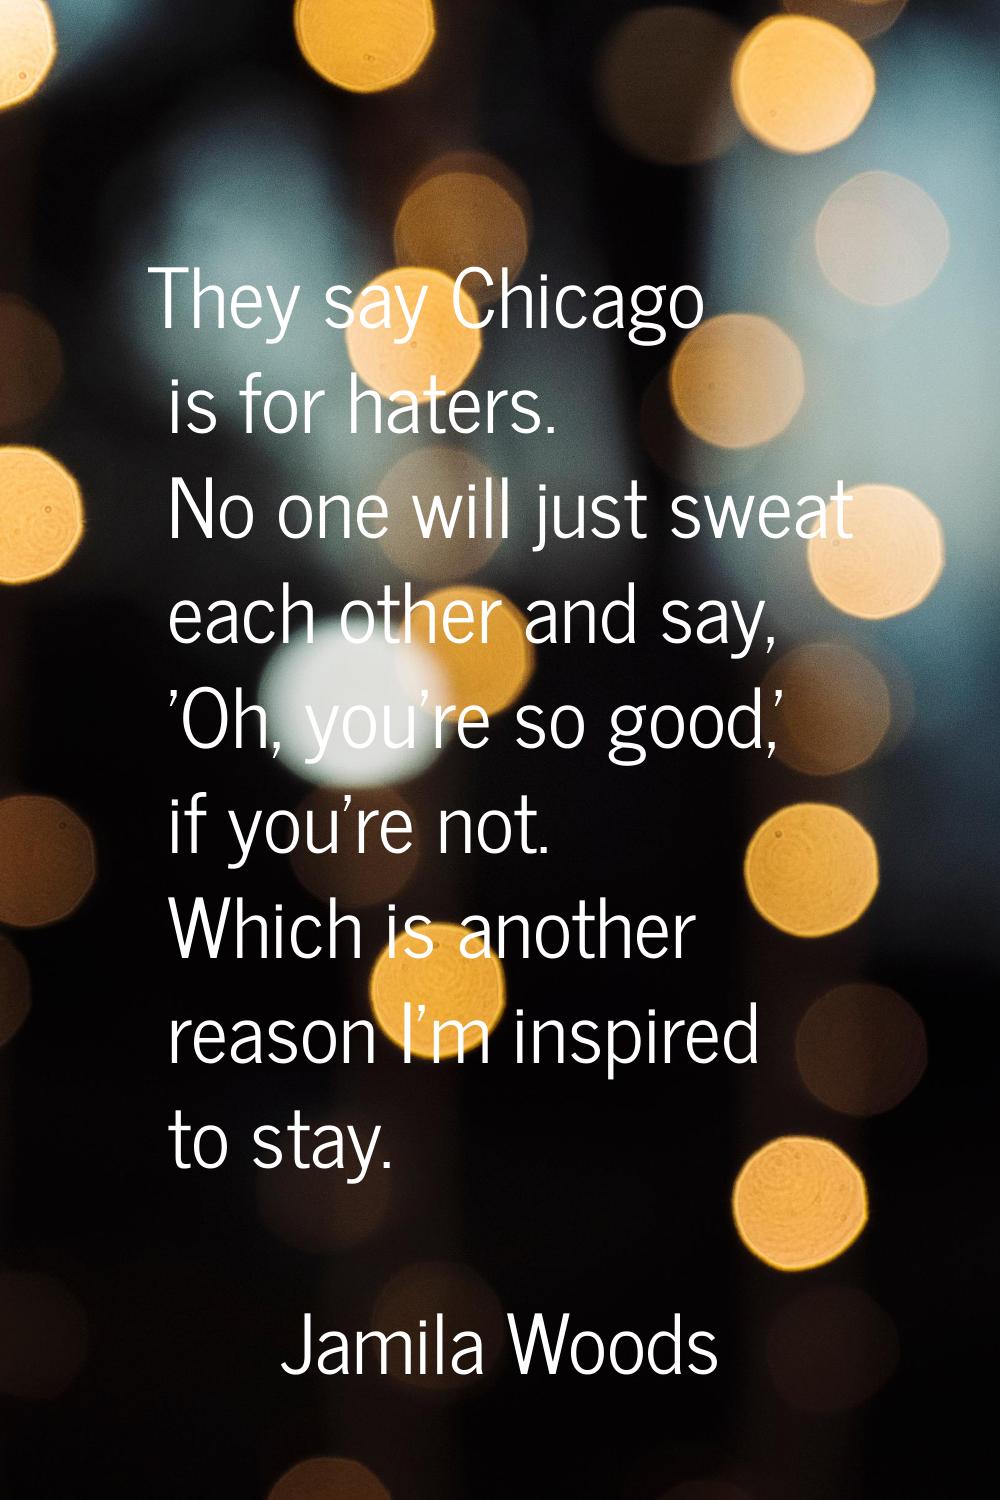 They say Chicago is for haters. No one will just sweat each other and say, 'Oh, you're so good,' if